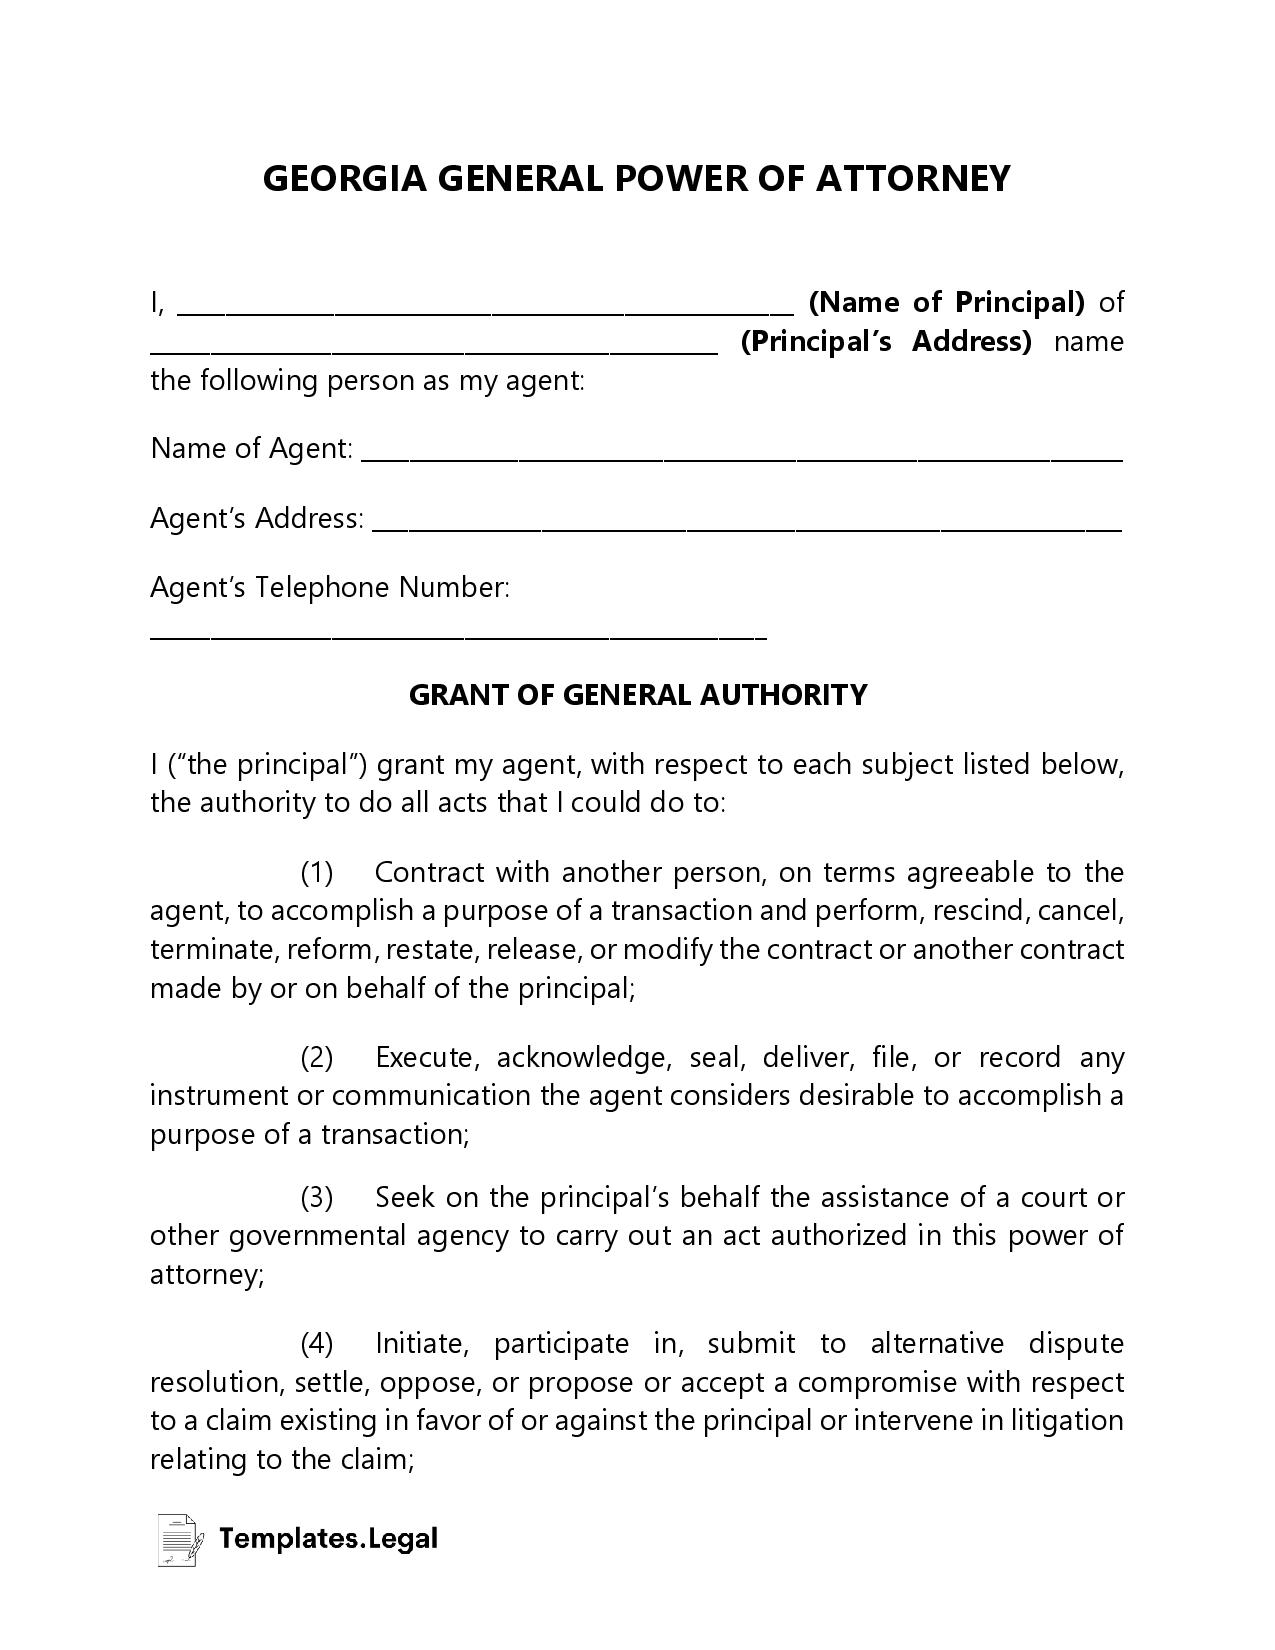 Georgia General Power of Attorney - Templates.Legal